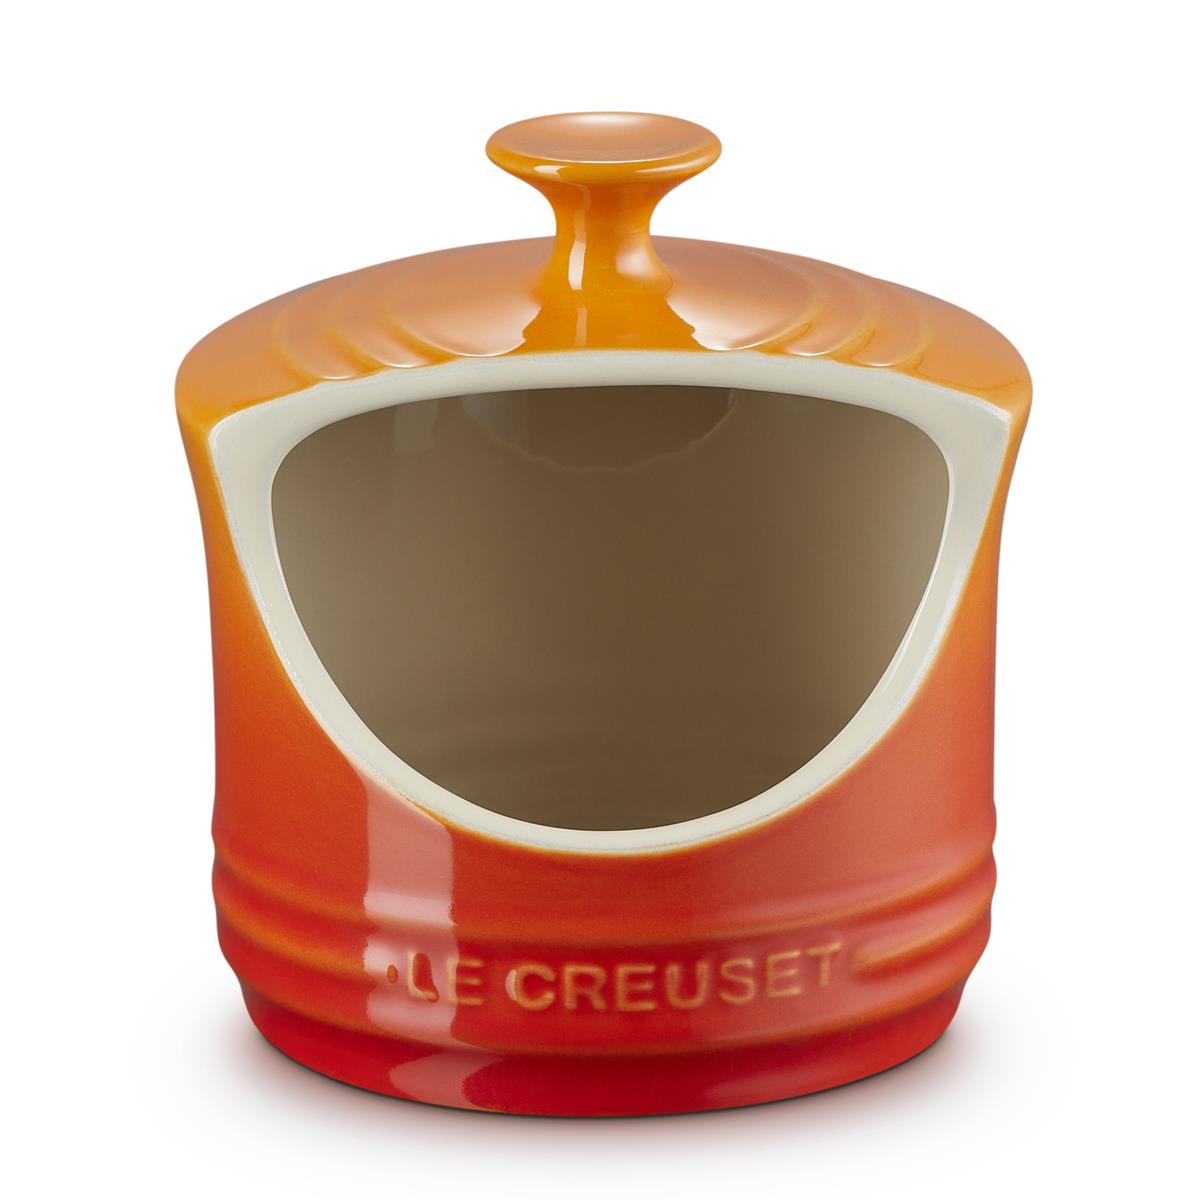 What features ensure the practicality & durability of the Le Creuset Salt Pig?